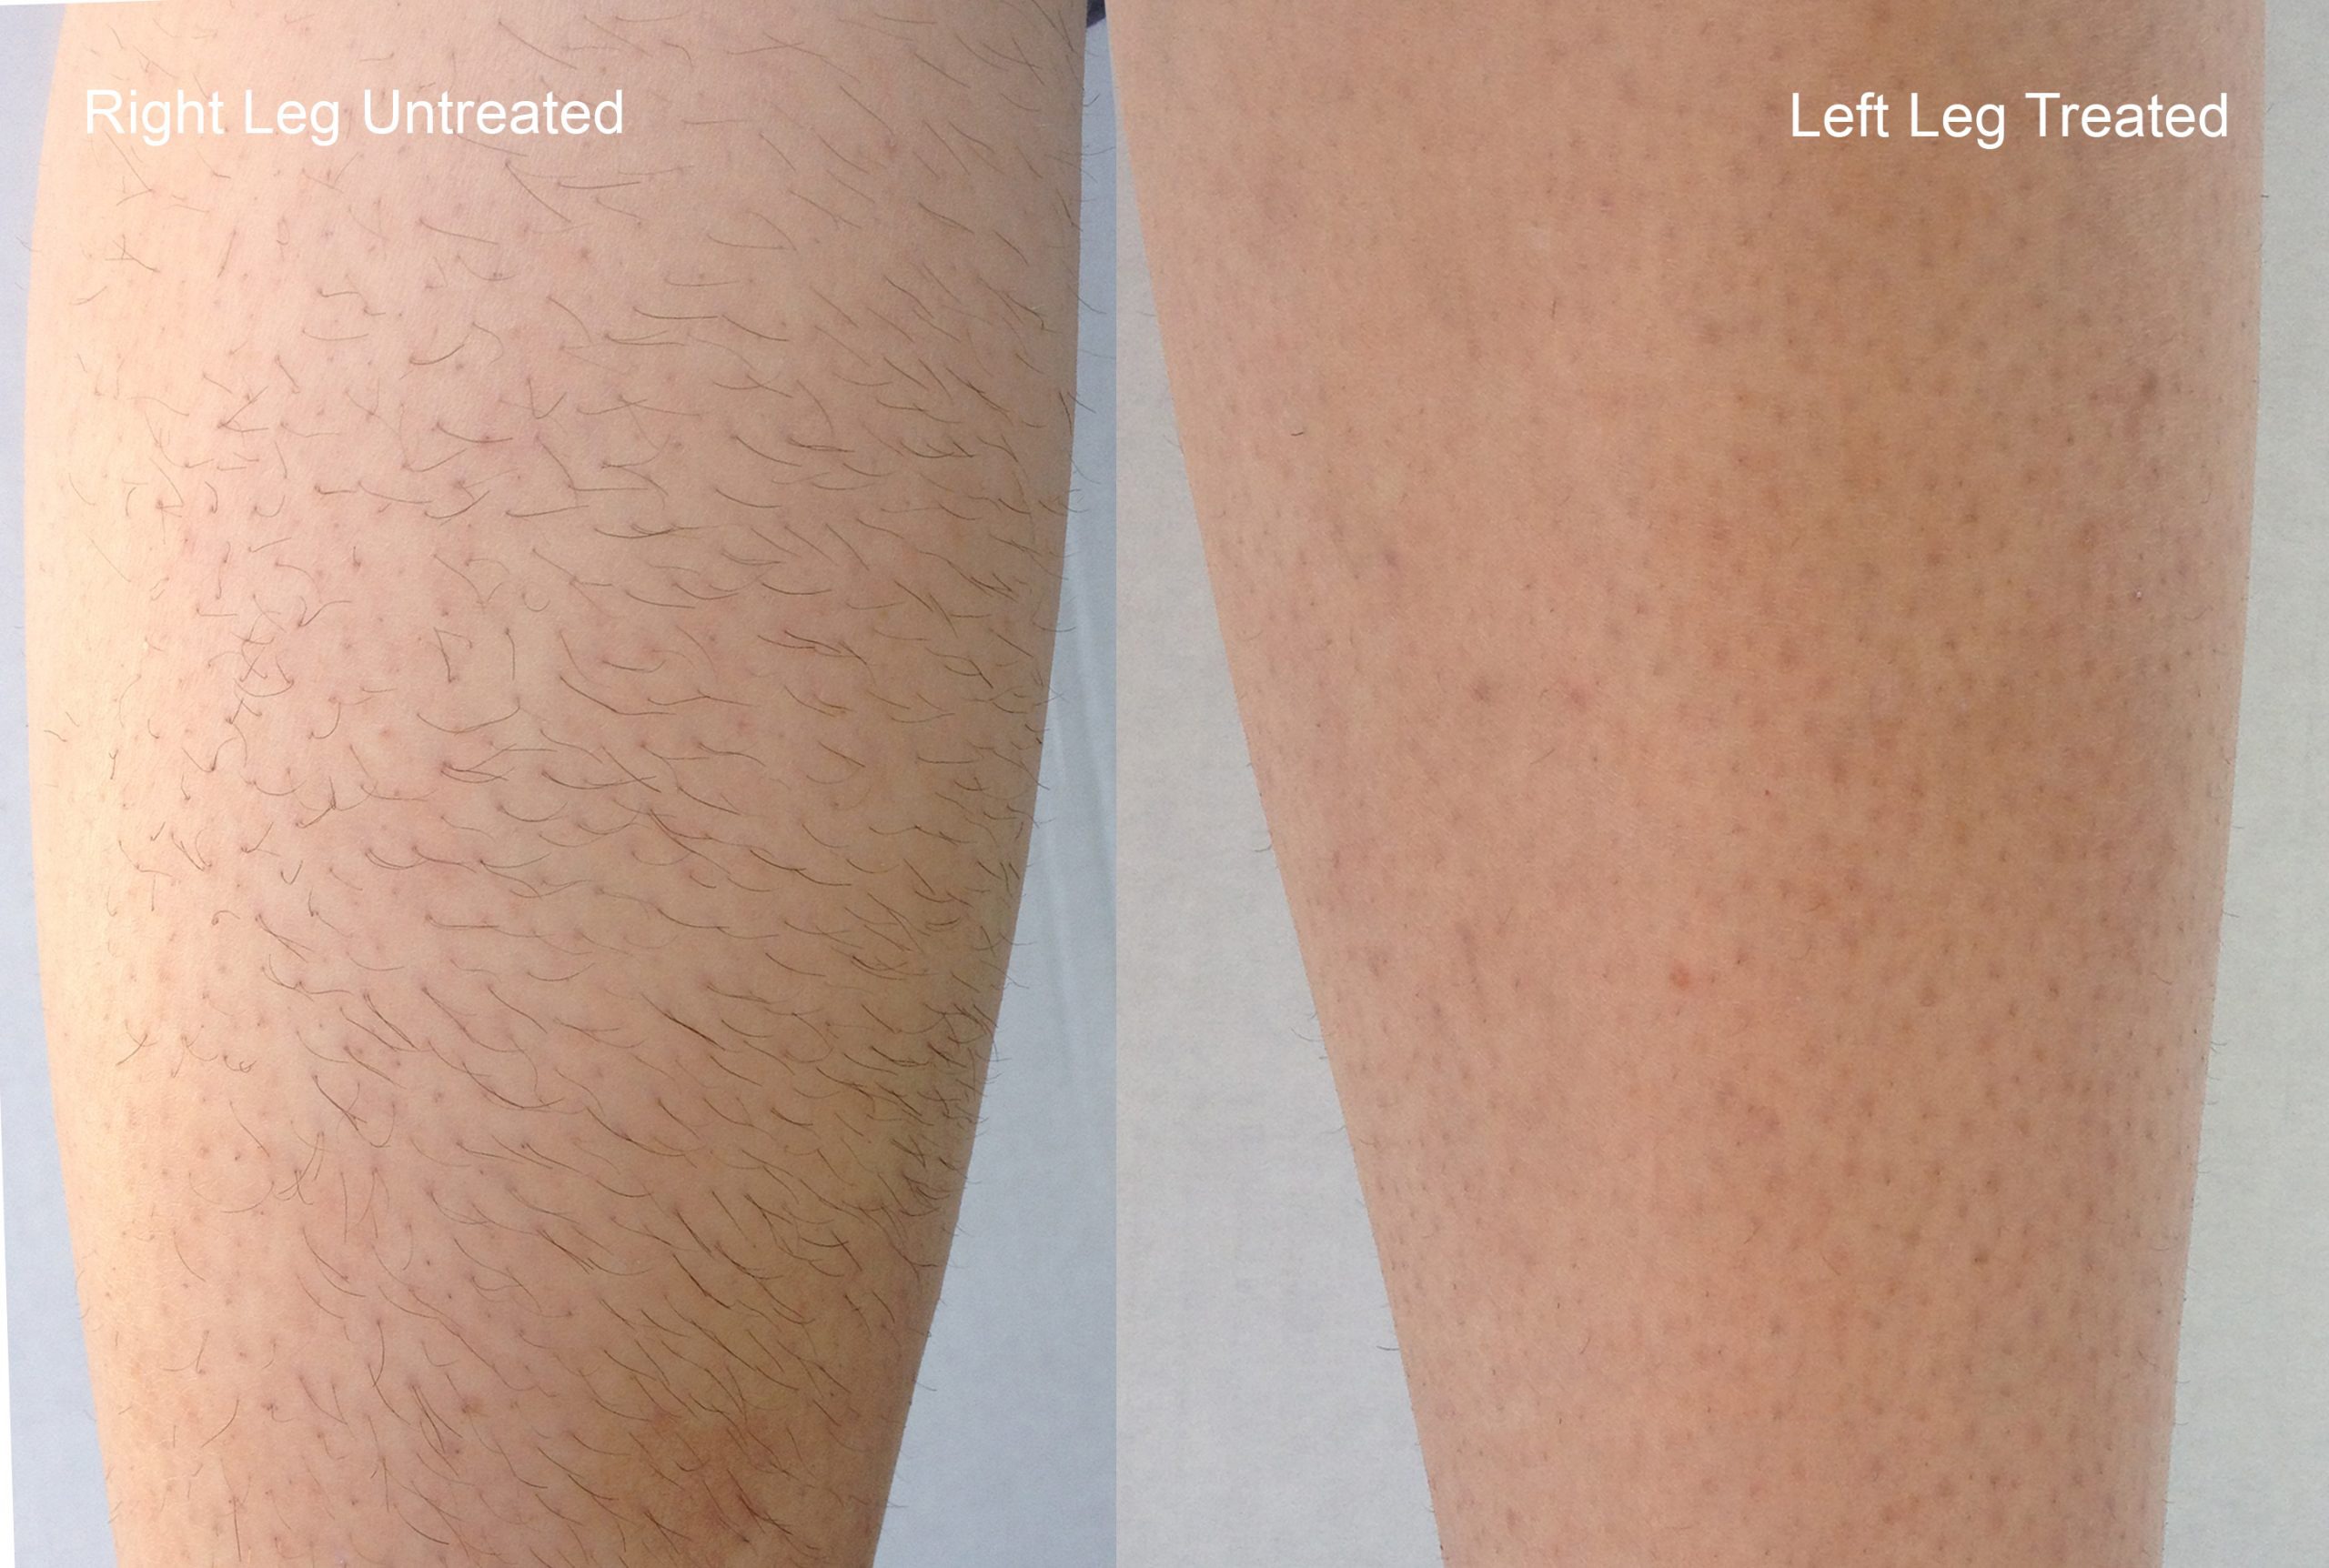 What Is The Cost Of Laser Hair Removal in Miami? - Solea Medical Spa